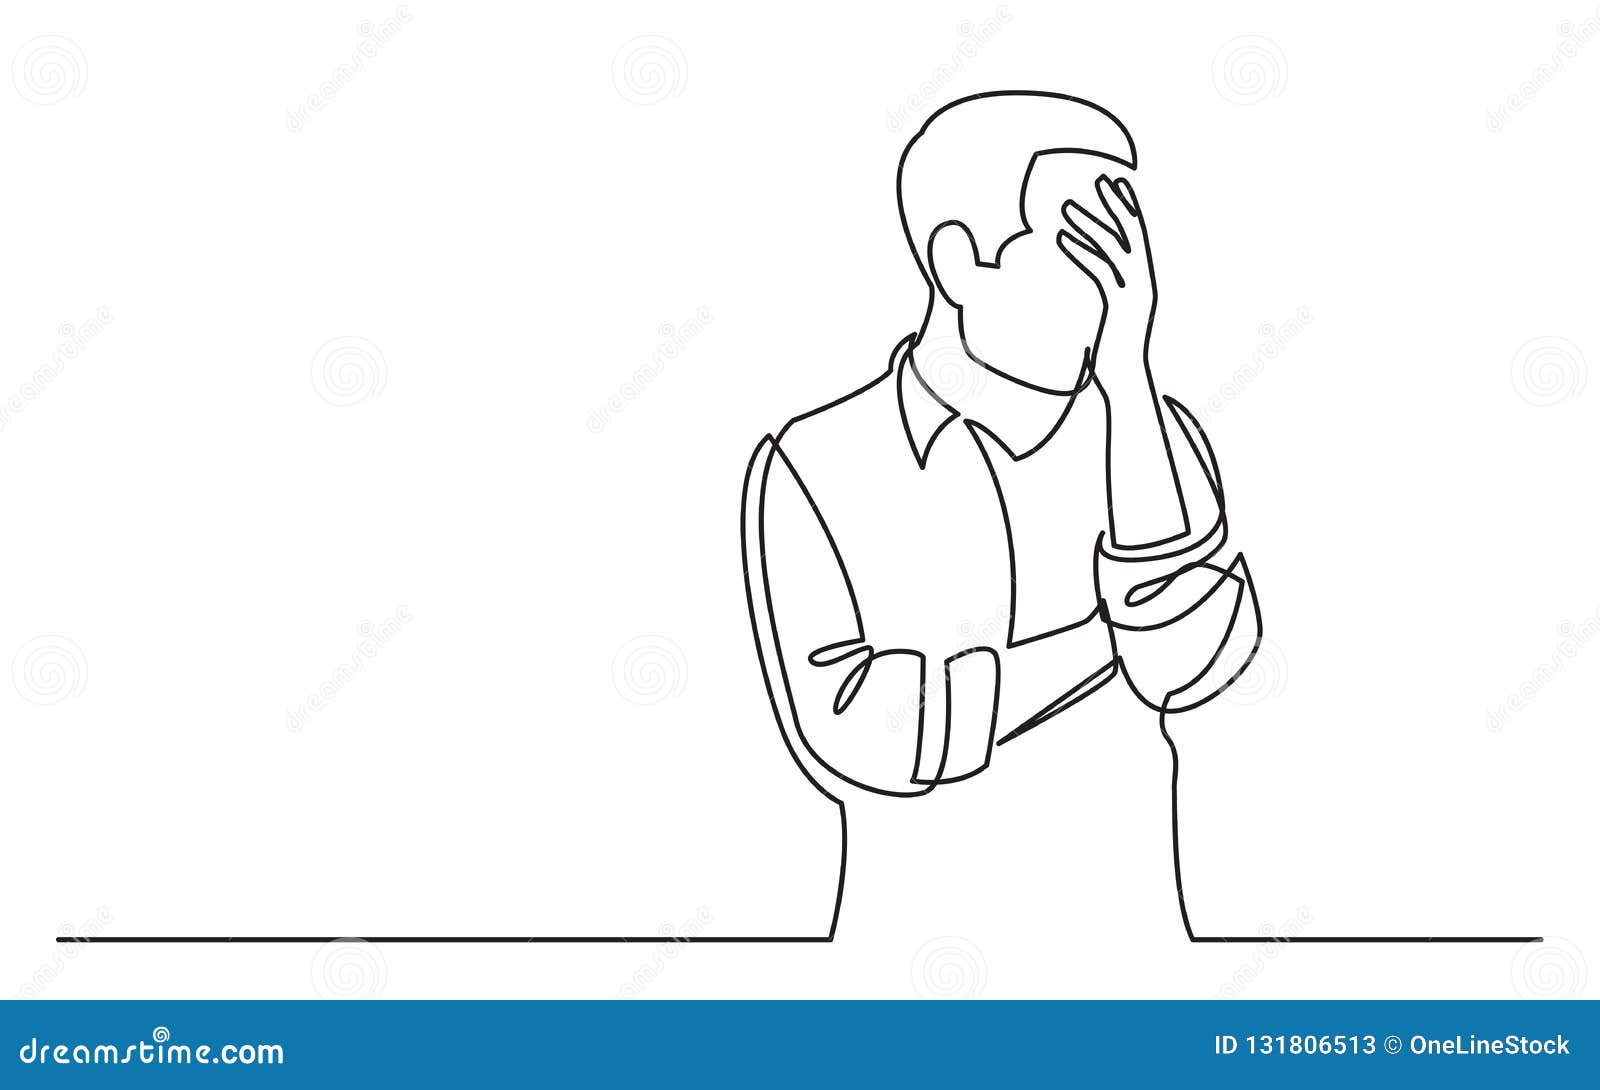 continuous line drawing of upset man in trouble